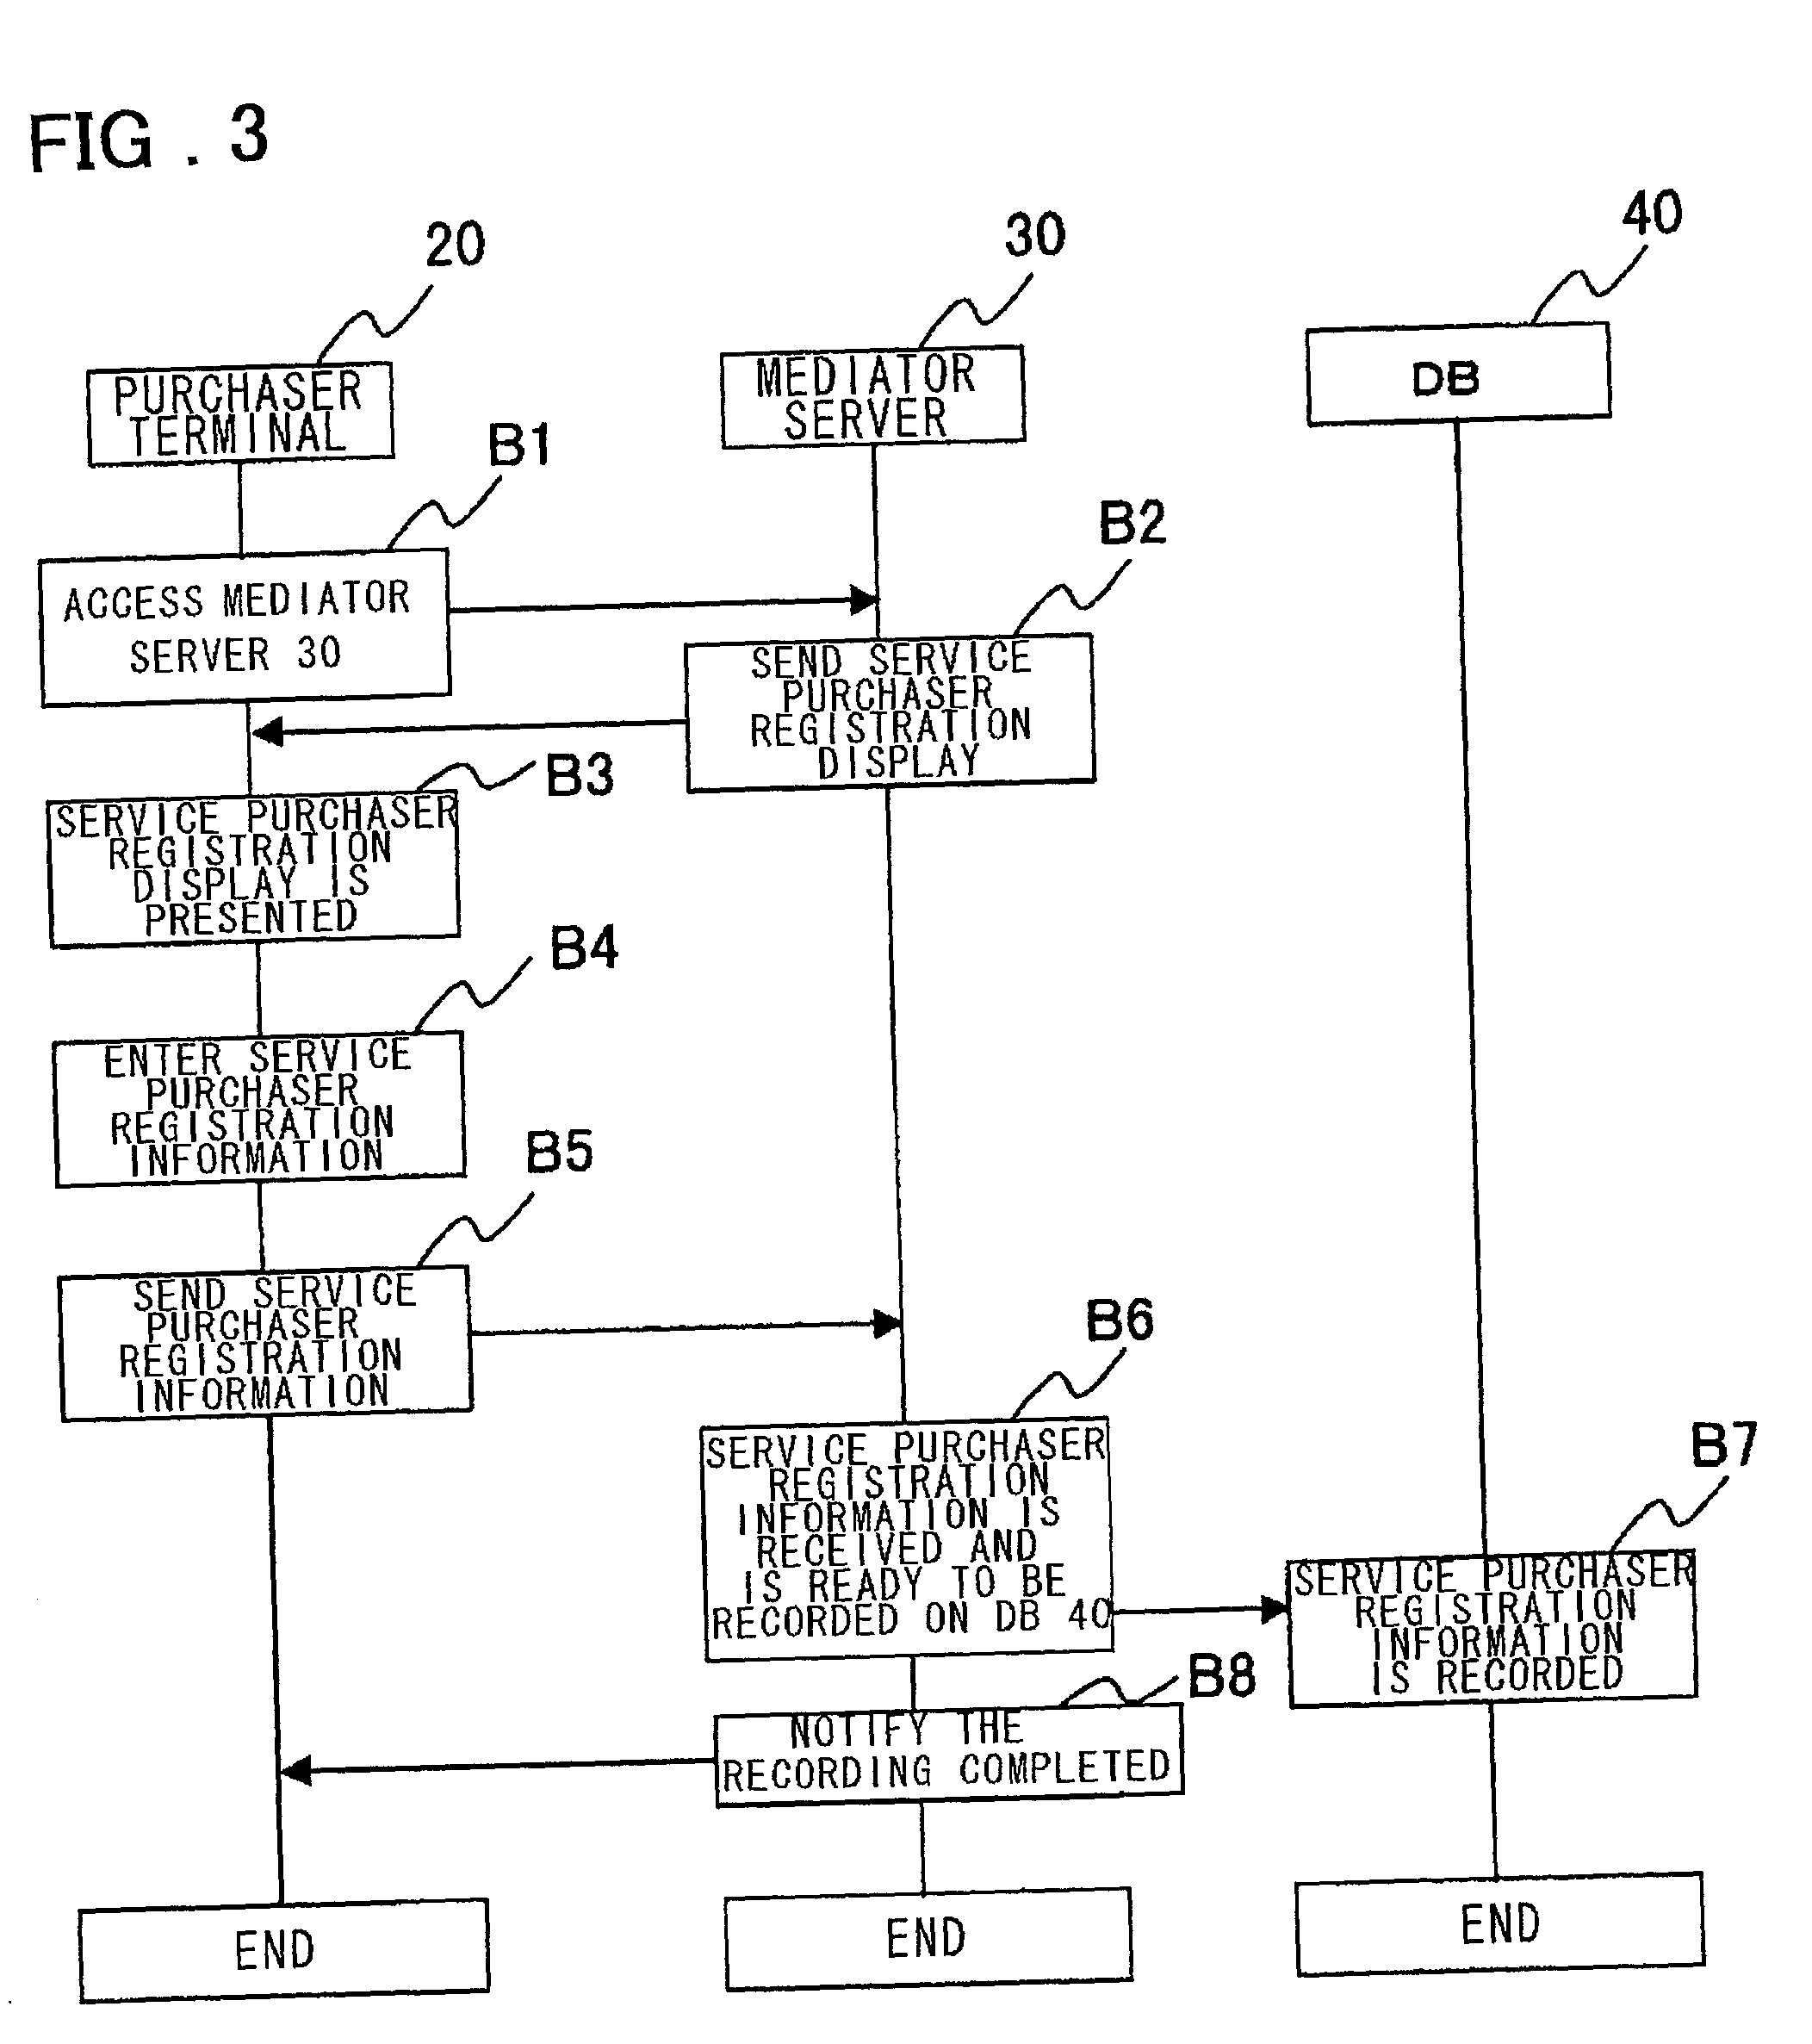 System and method for providing mediator services between service provider and service purchaser, and computer program for same